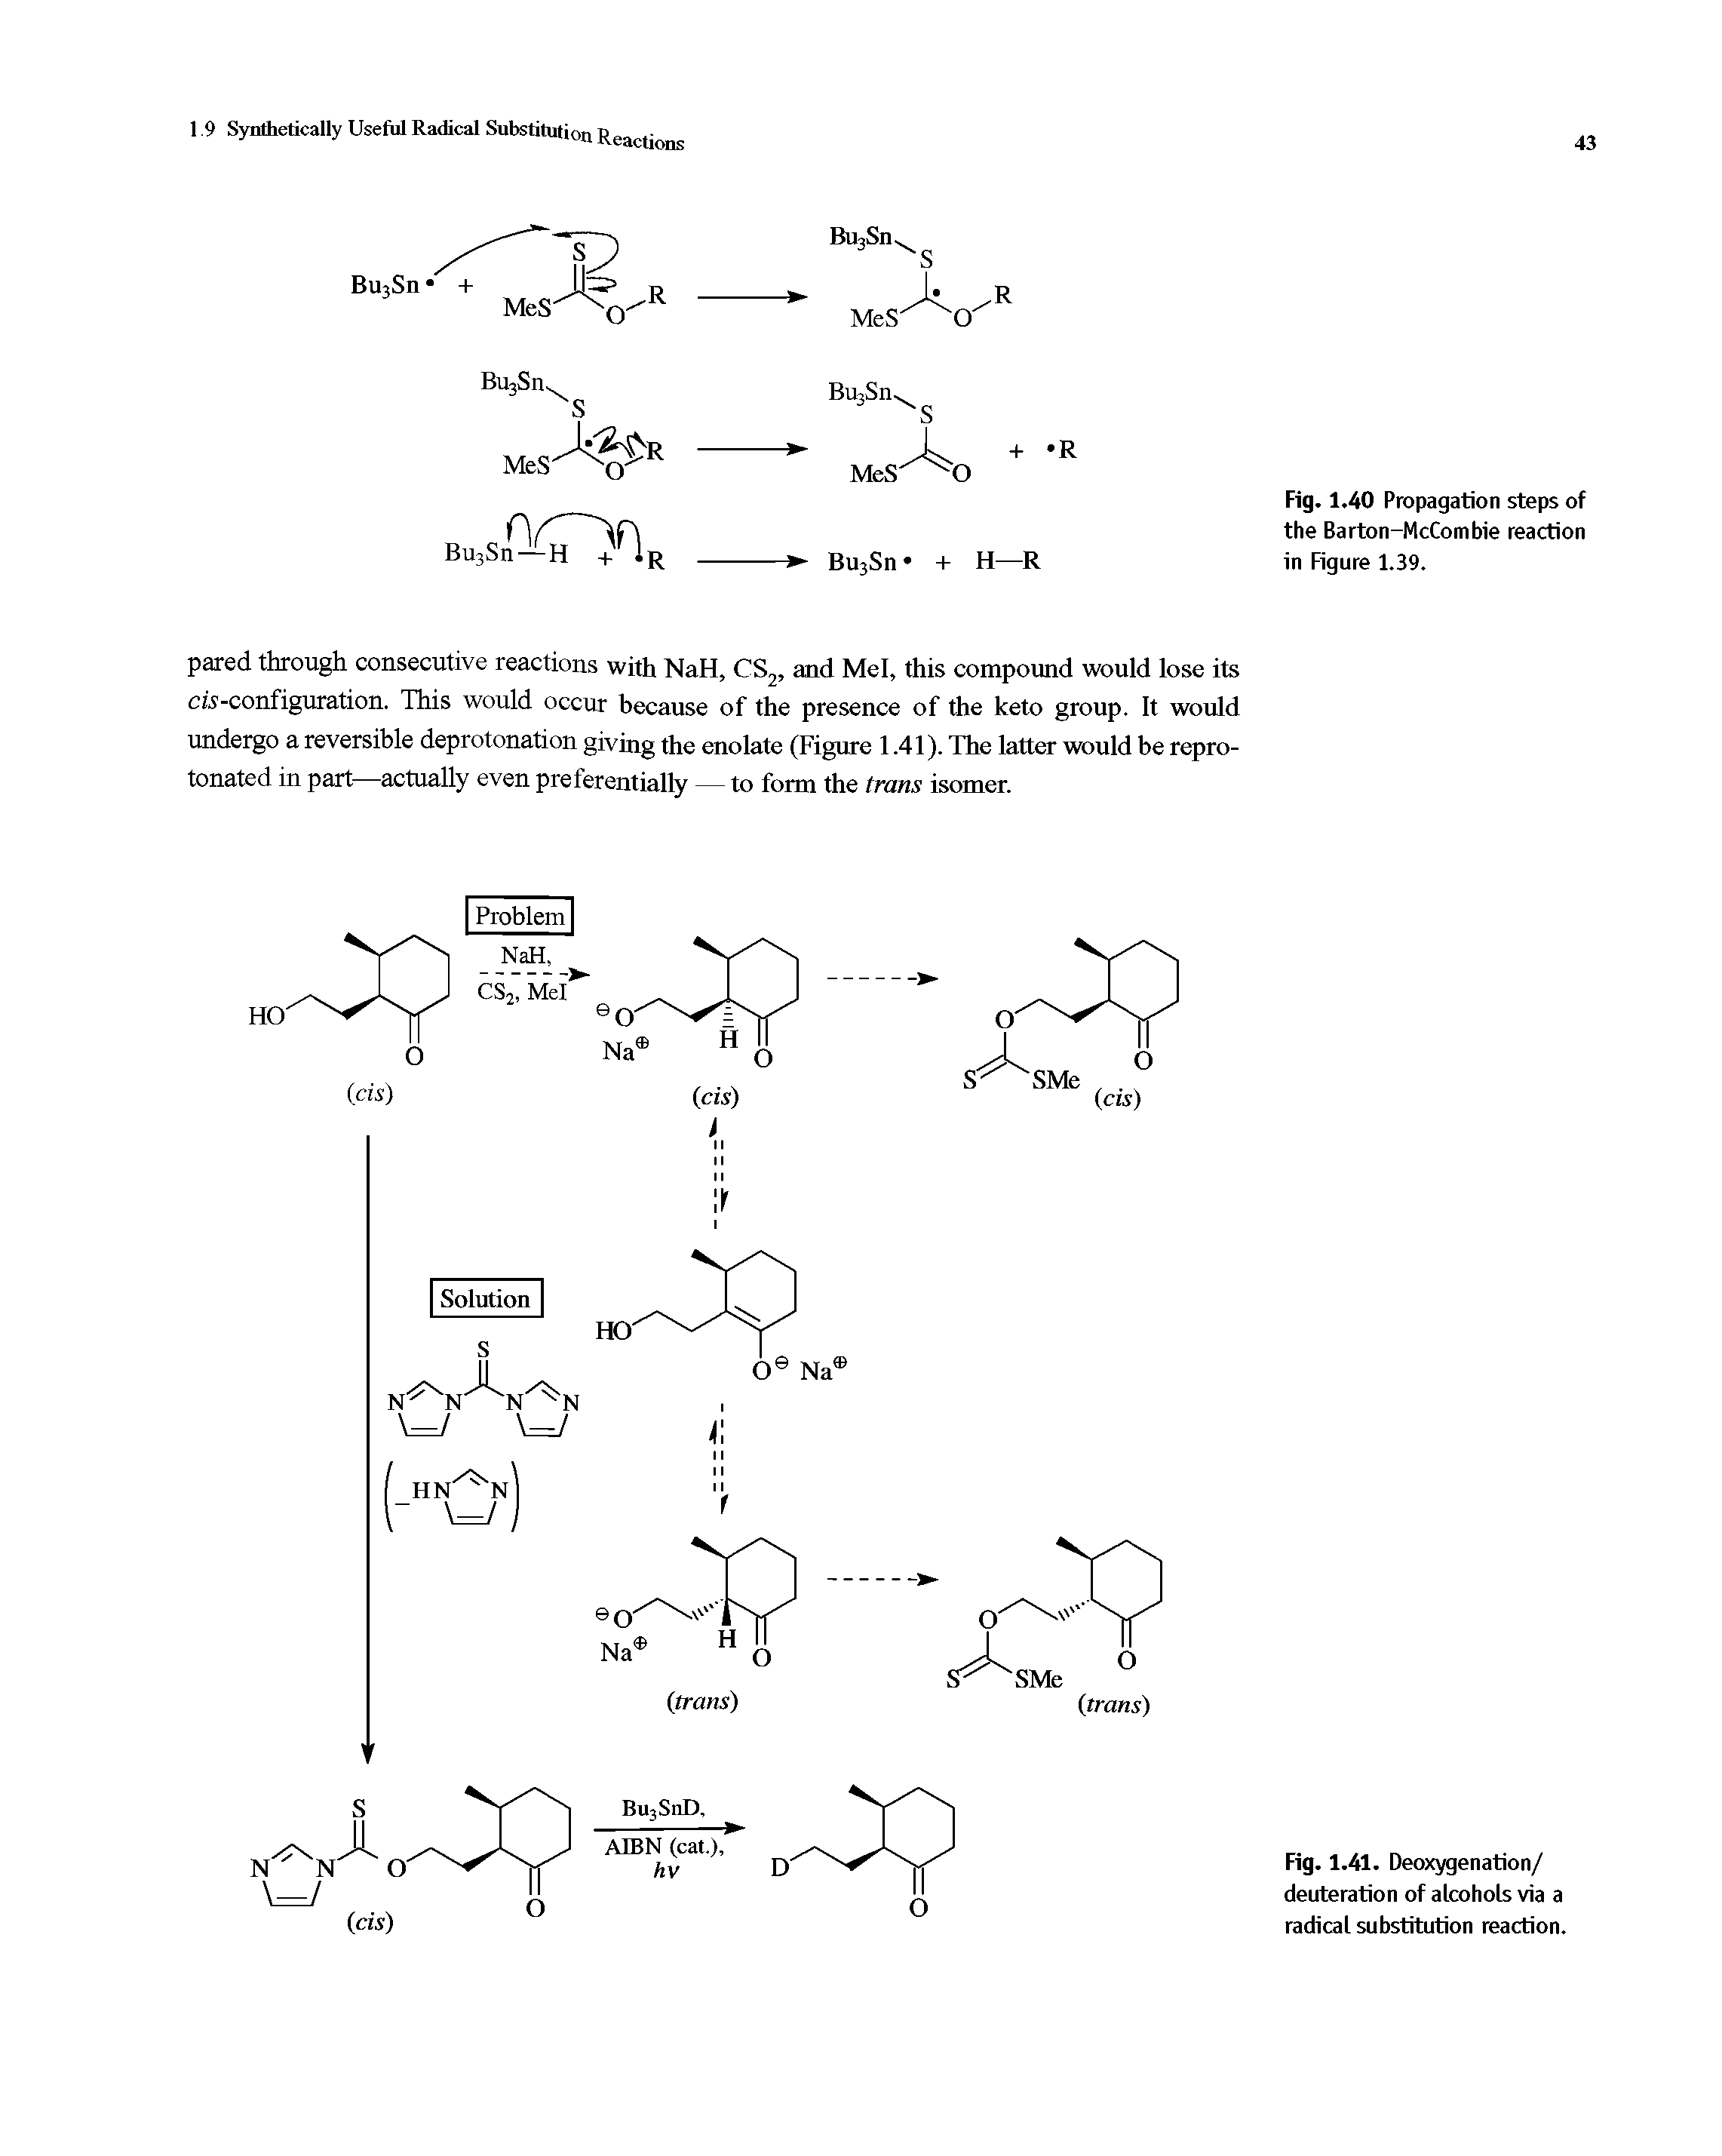 Fig. 1.41. Deoxygenation/ deuteration of alcohols via a radical substitution reaction.